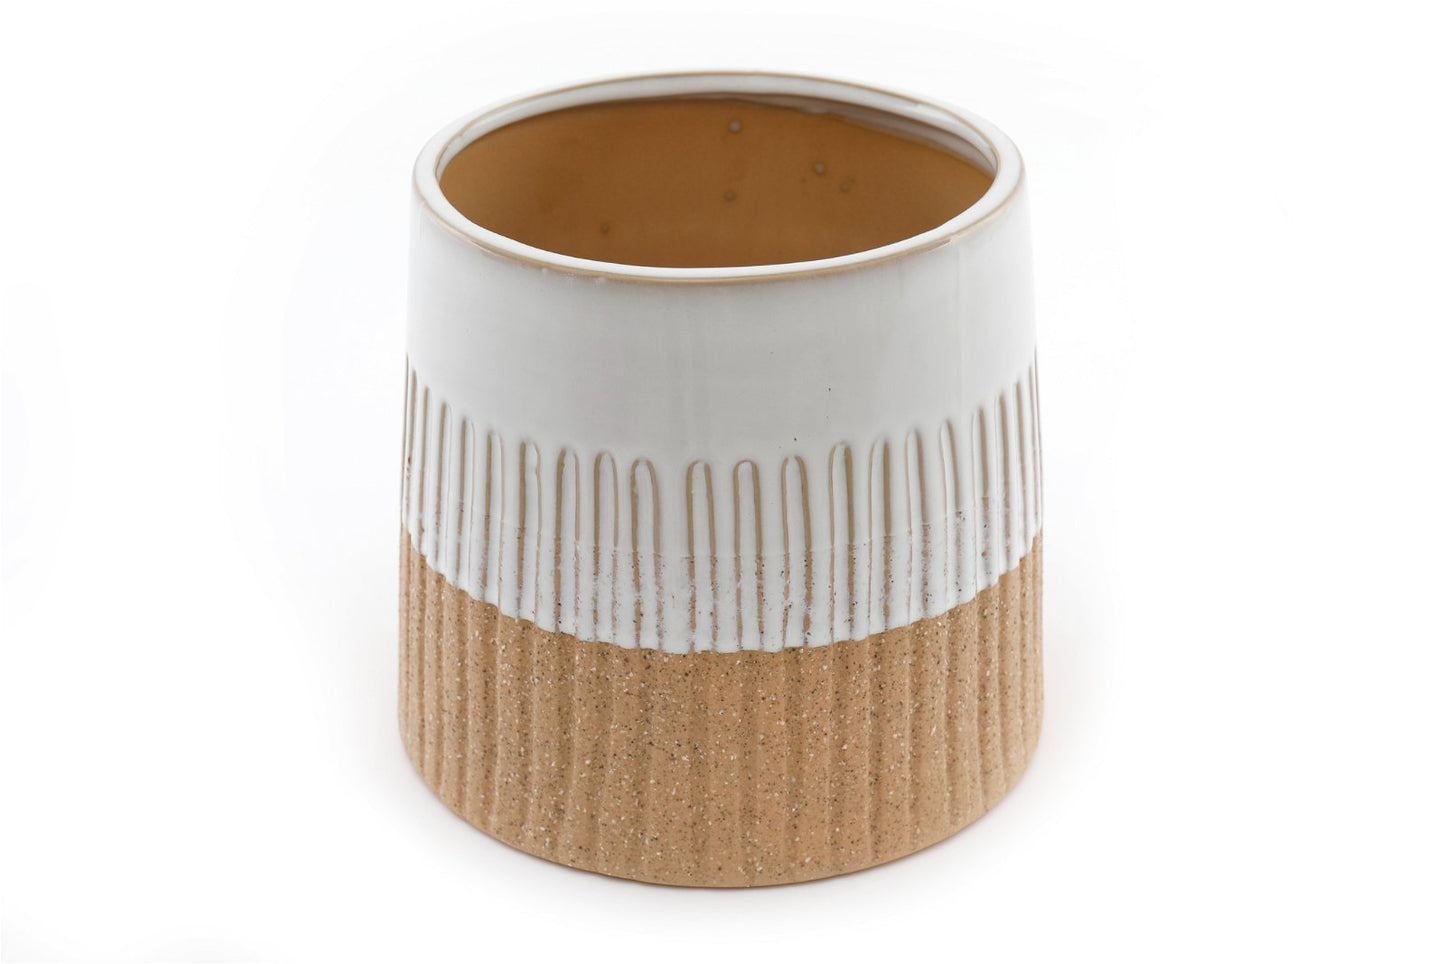 Two-tone Textured Ceramic Planter - a Cheeky Plant